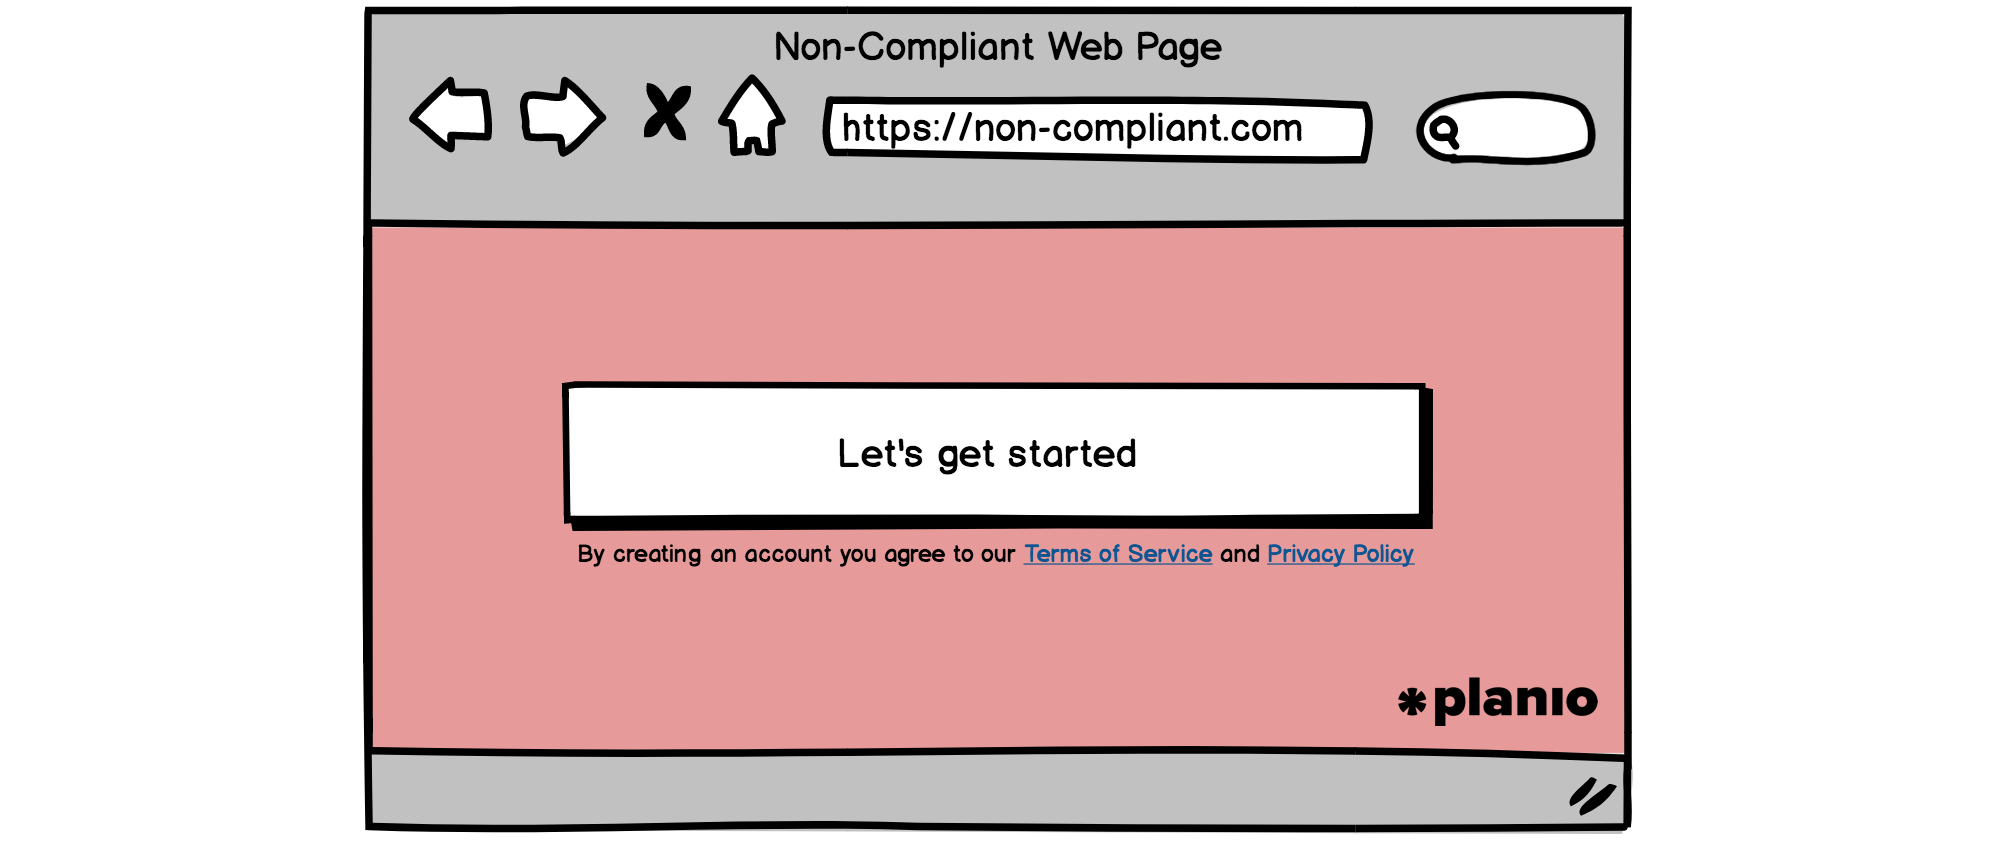 Non-compliant sign-up form